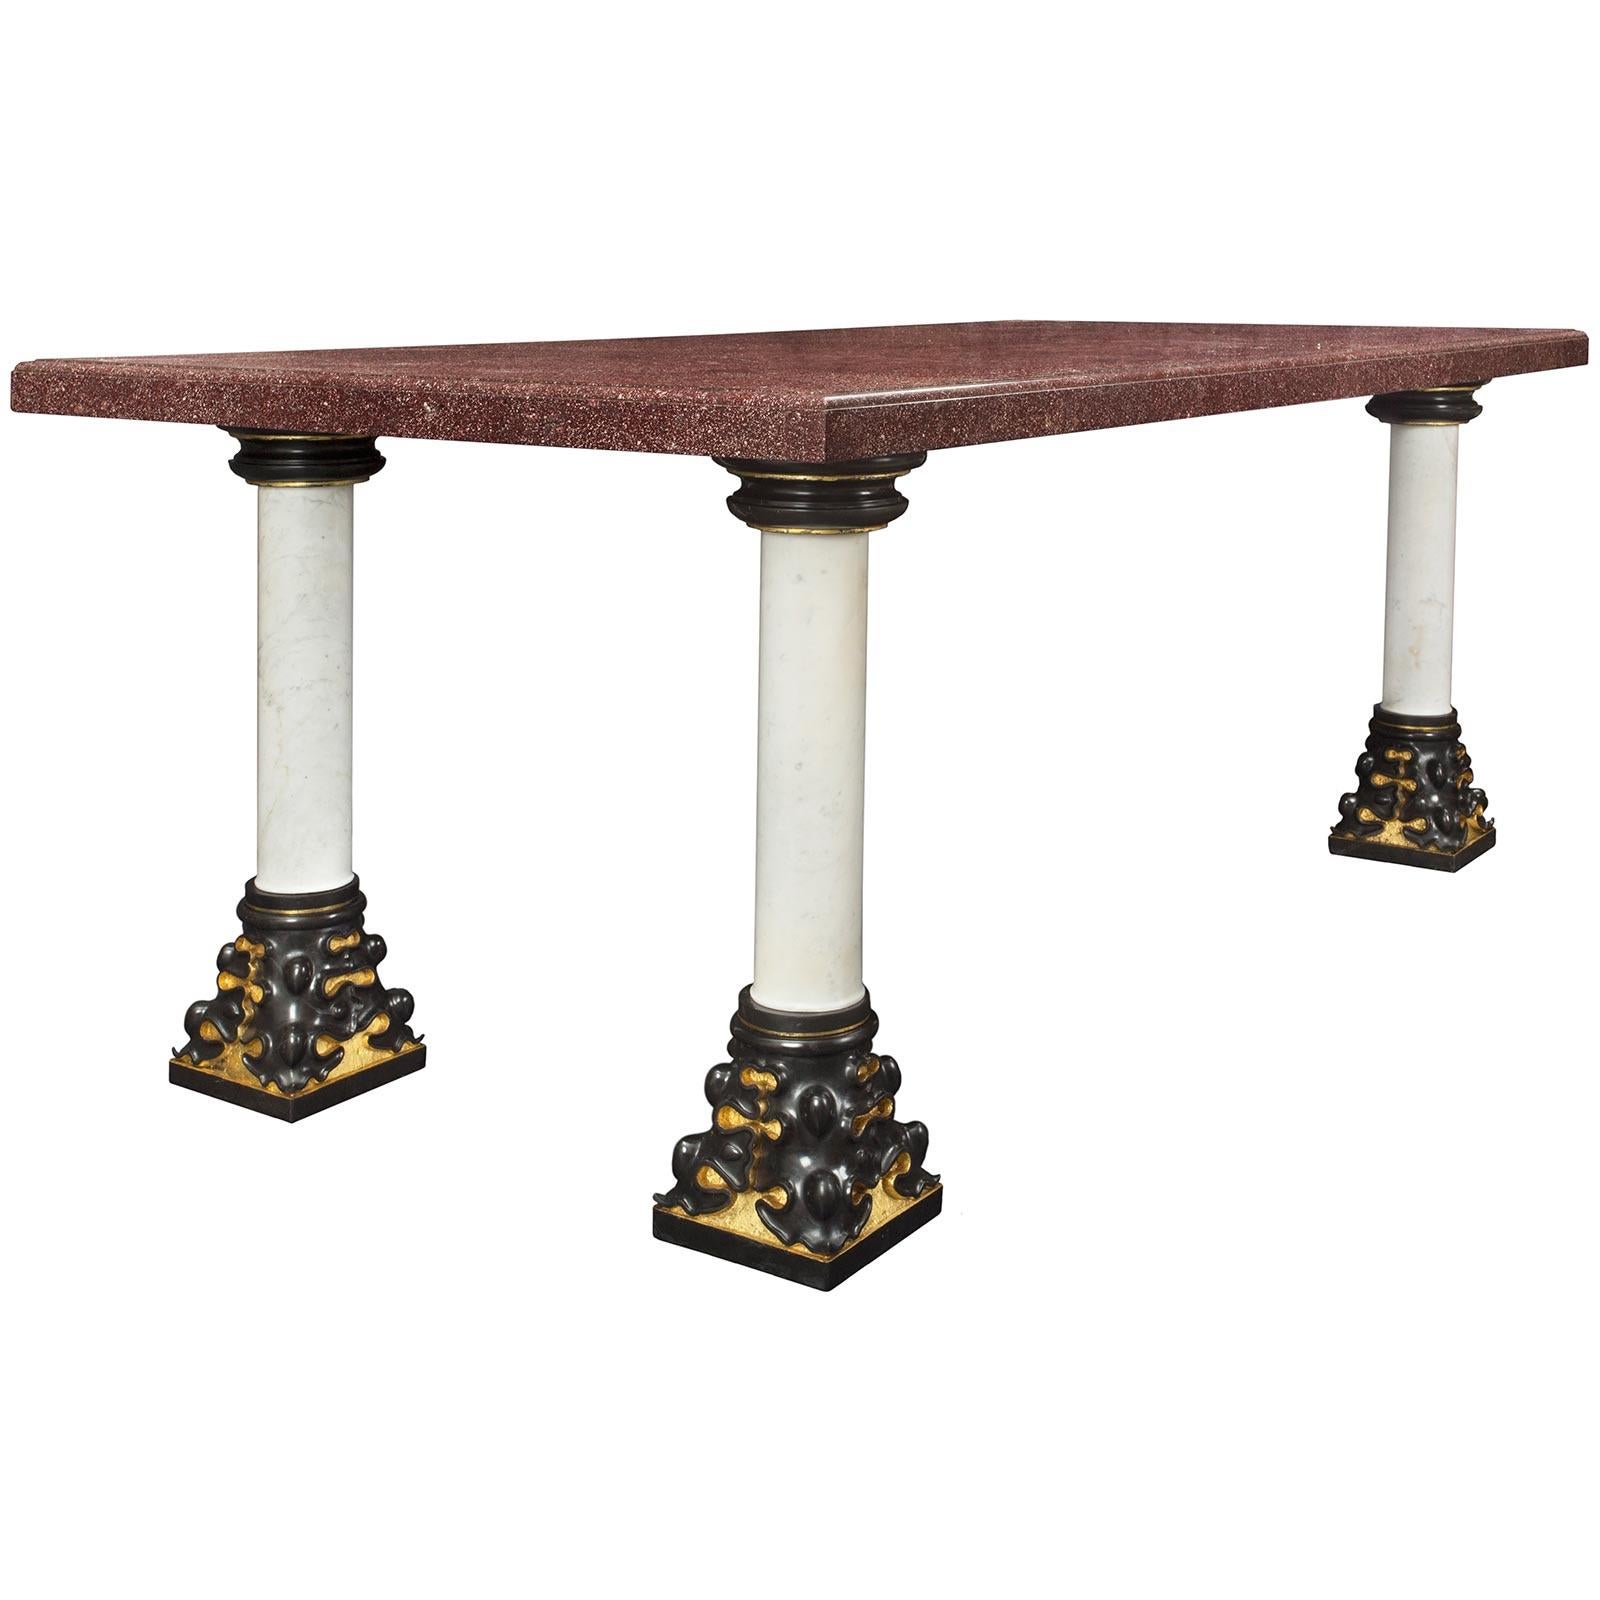 Italian 19th Century Neoclassical Style Marble Center and Dining Table In Good Condition For Sale In West Palm Beach, FL